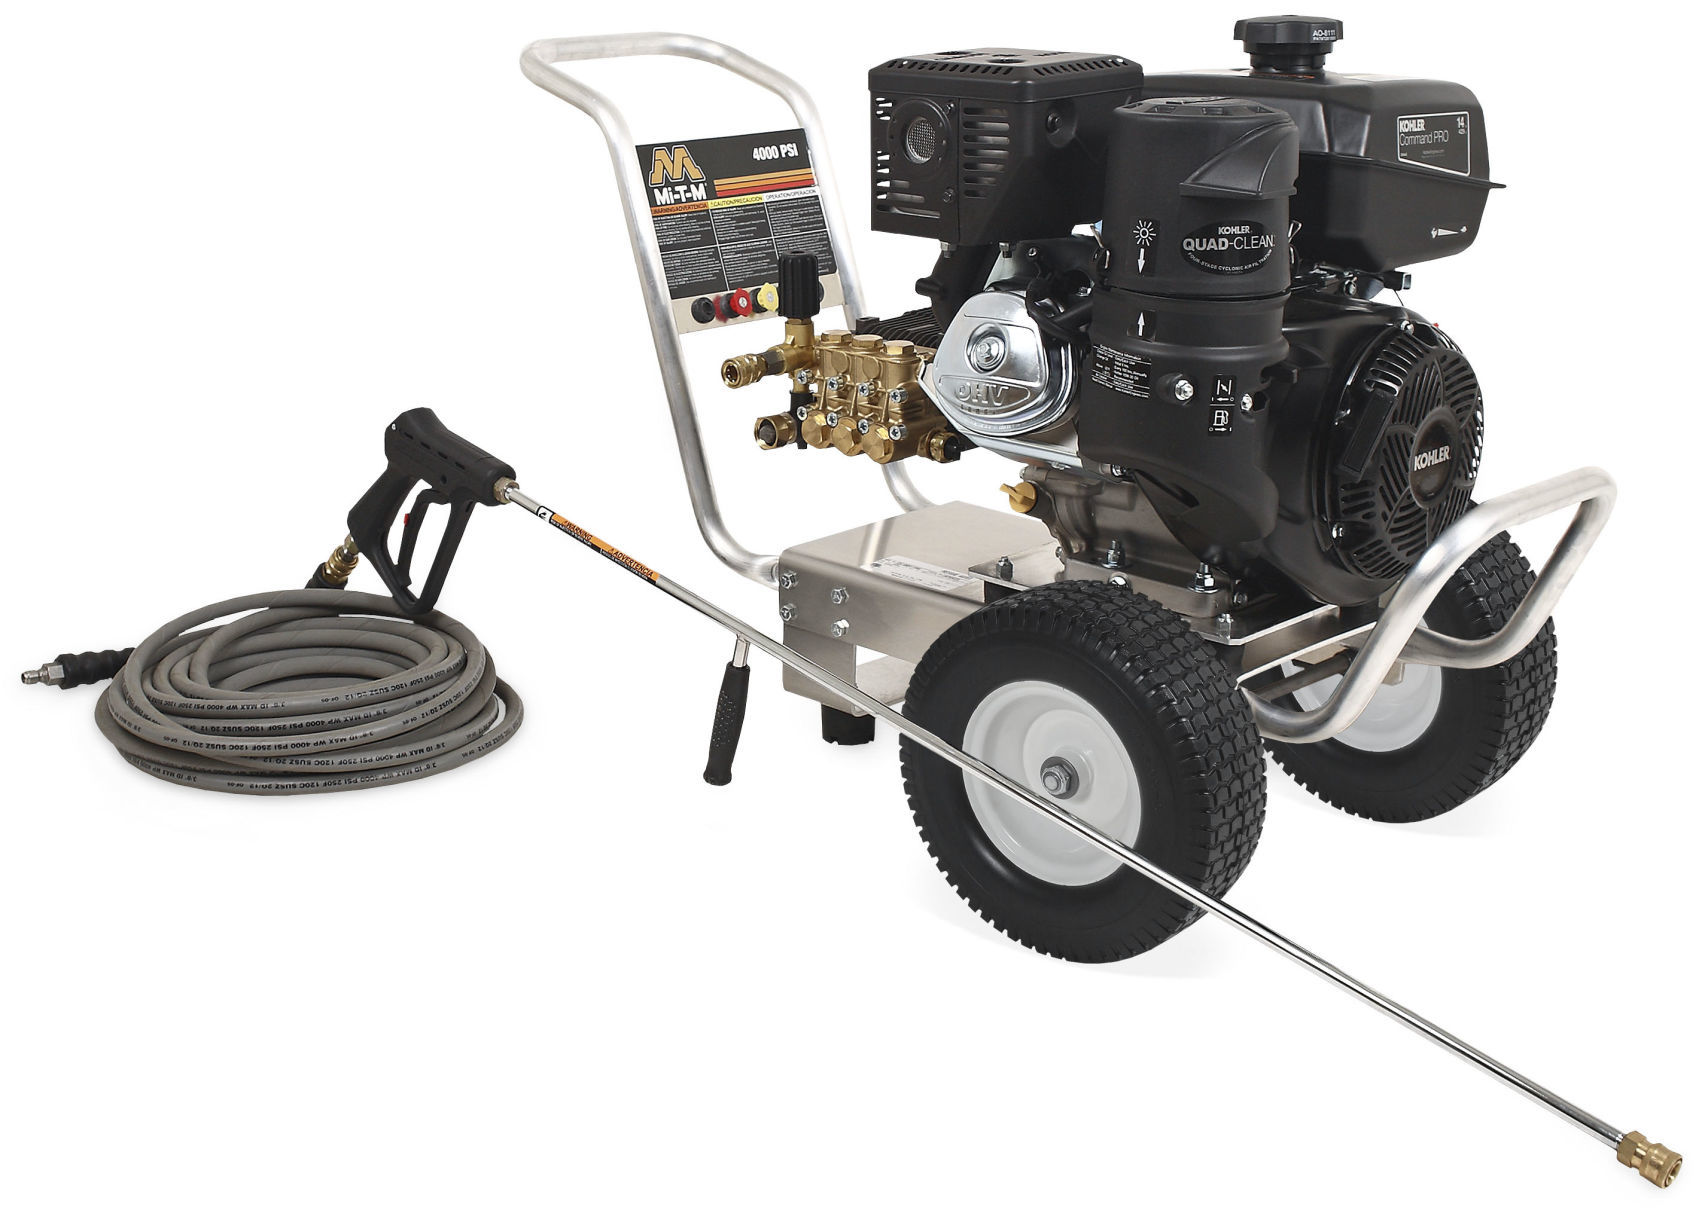 A Mi-T-M 4000 PSI cold water pressure washer.    PHOTO CREDIT: Contributed